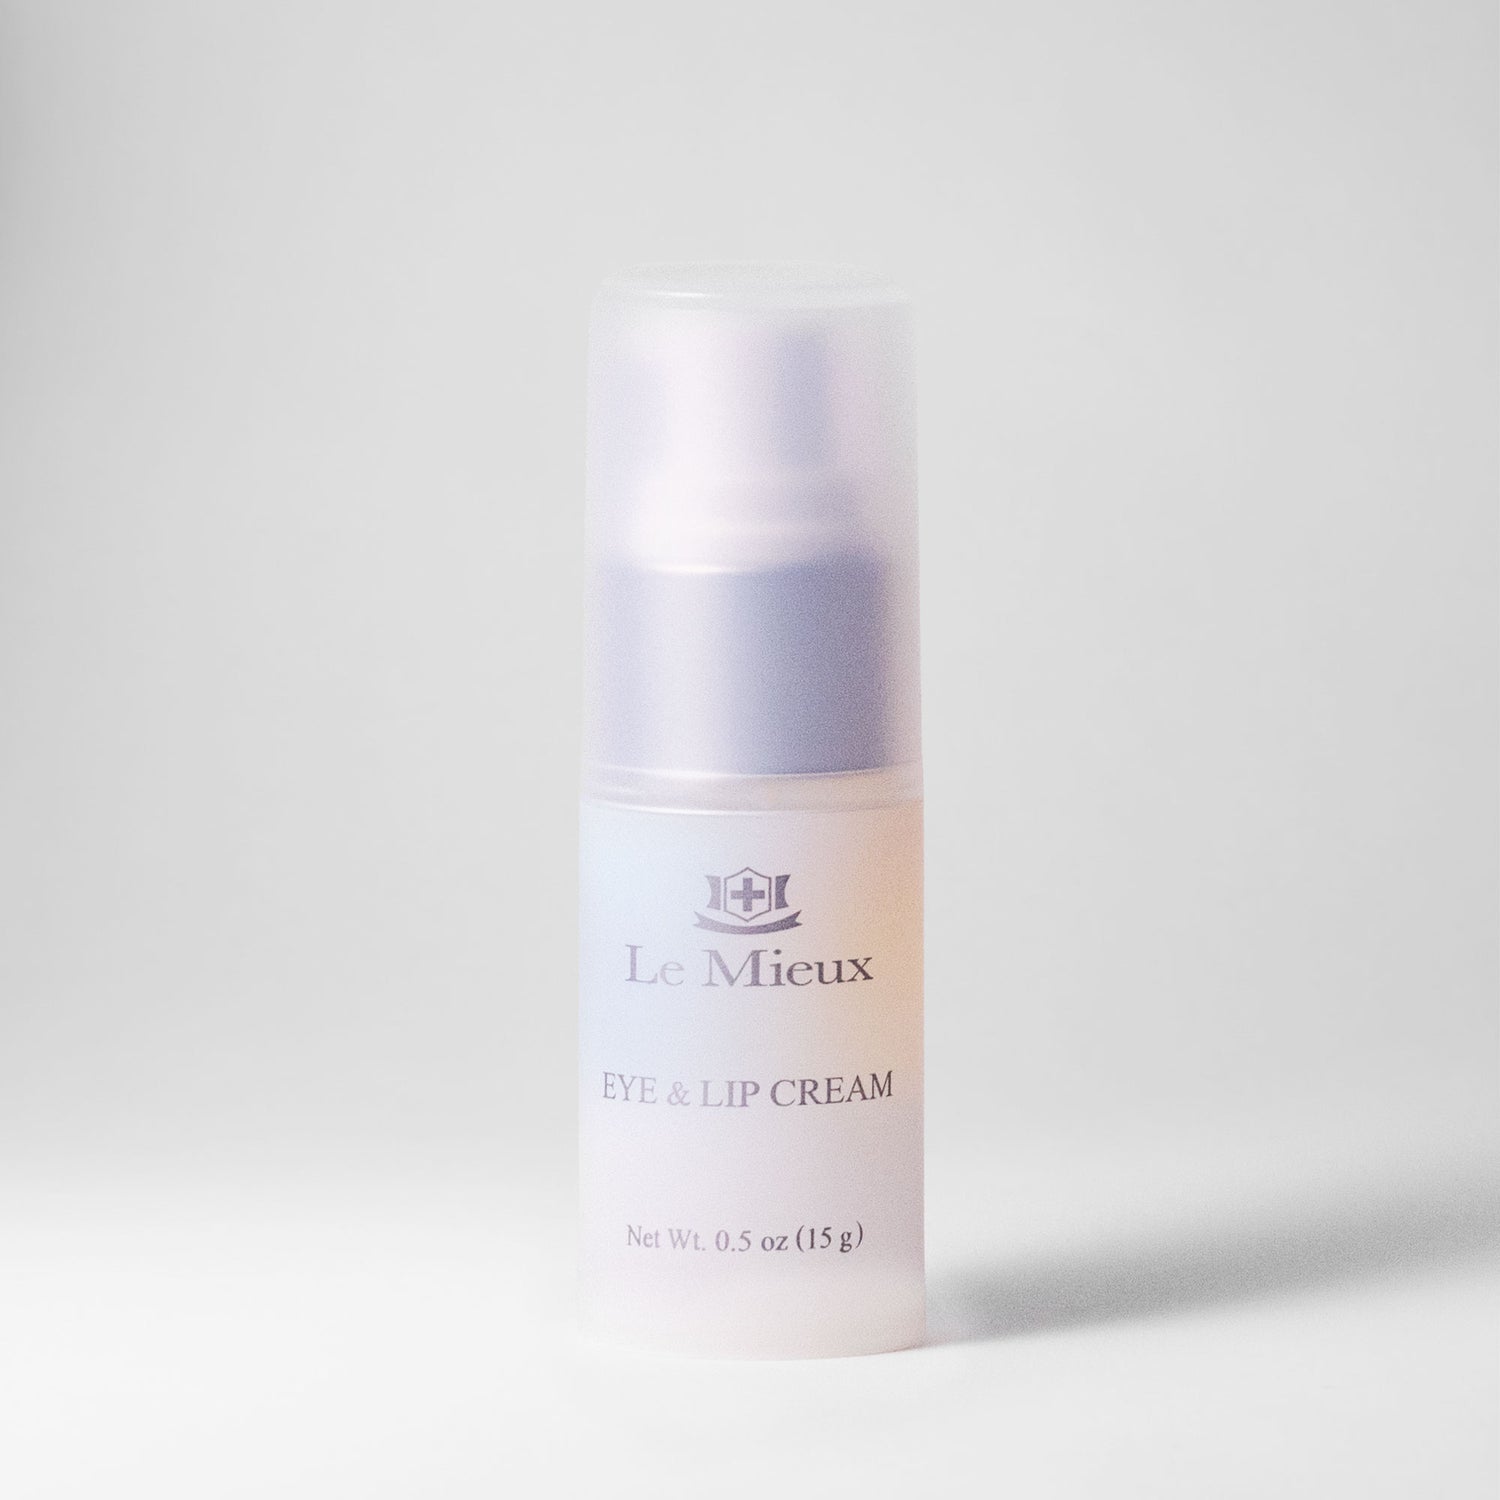  EYE & LIP CREAM from Le Mieux Skincare - 1